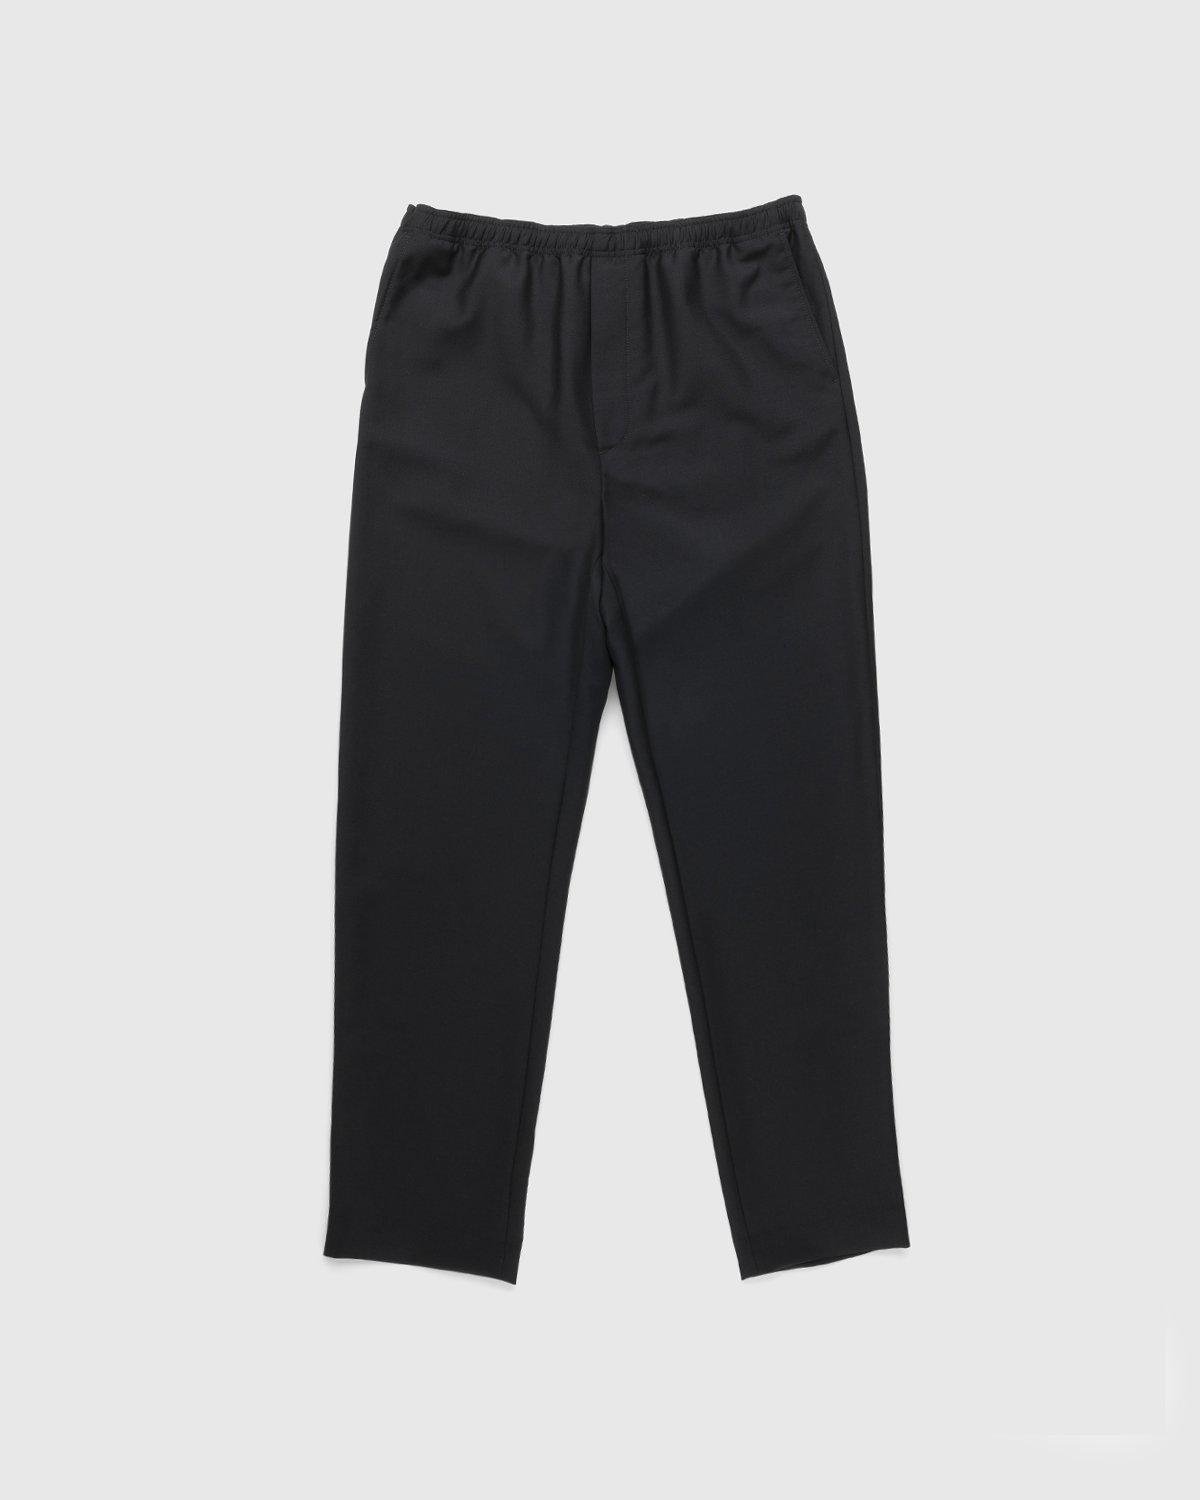 Mohair Blend Drawstring Trousers Black by ACNE STUDIOS